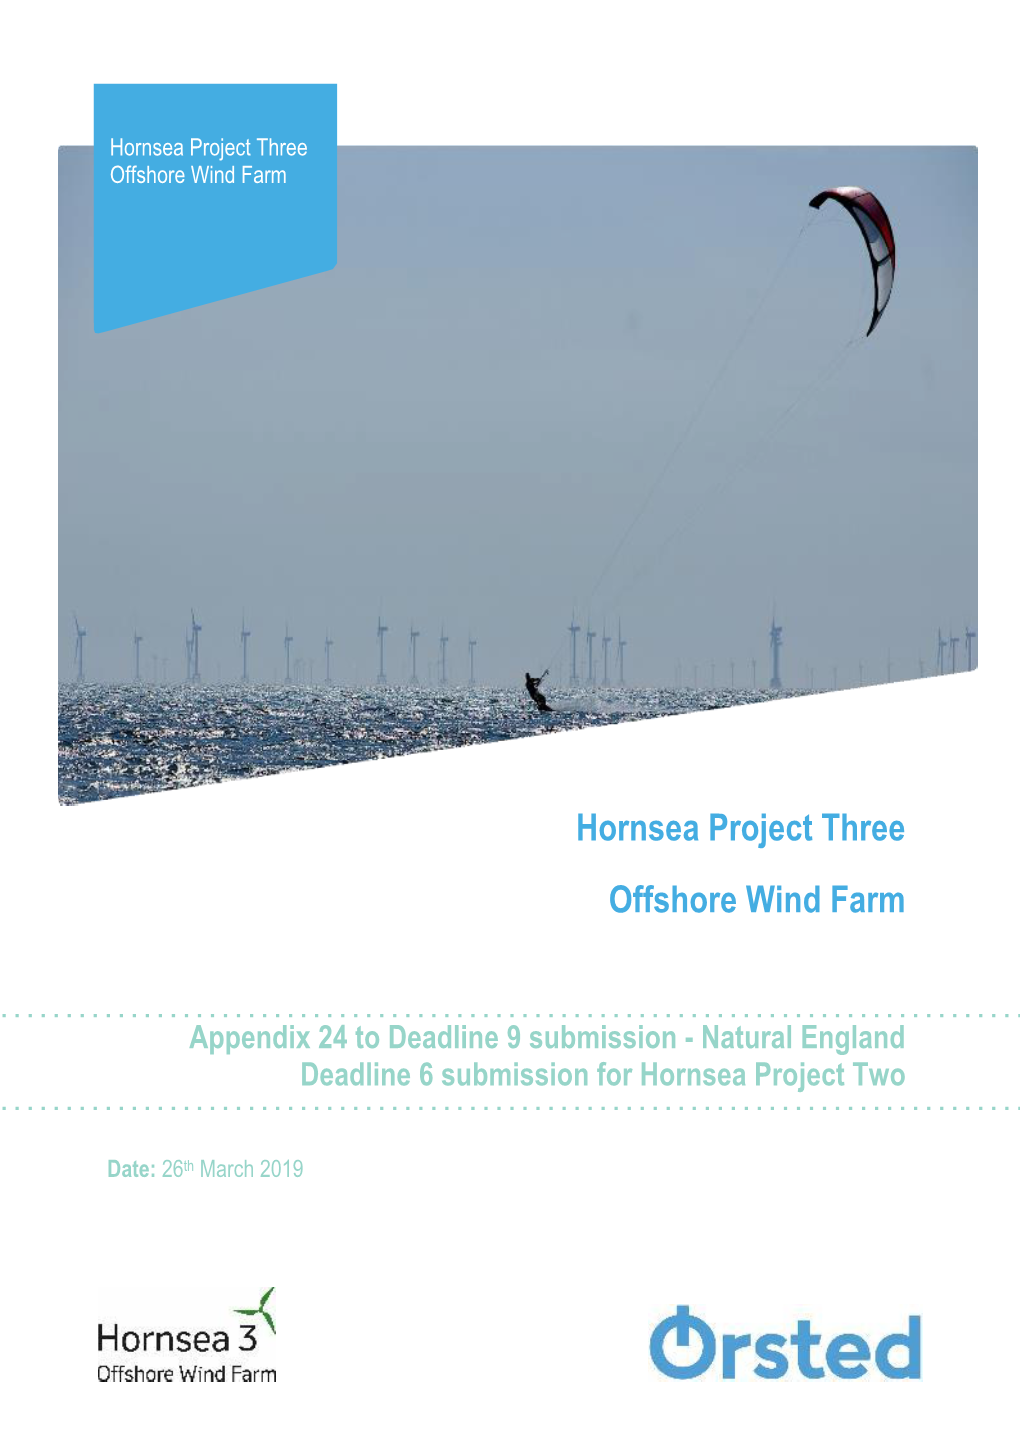 Hornsea Project Three Offshore Wind Farm Appendix 24 to Deadline 9 Submission